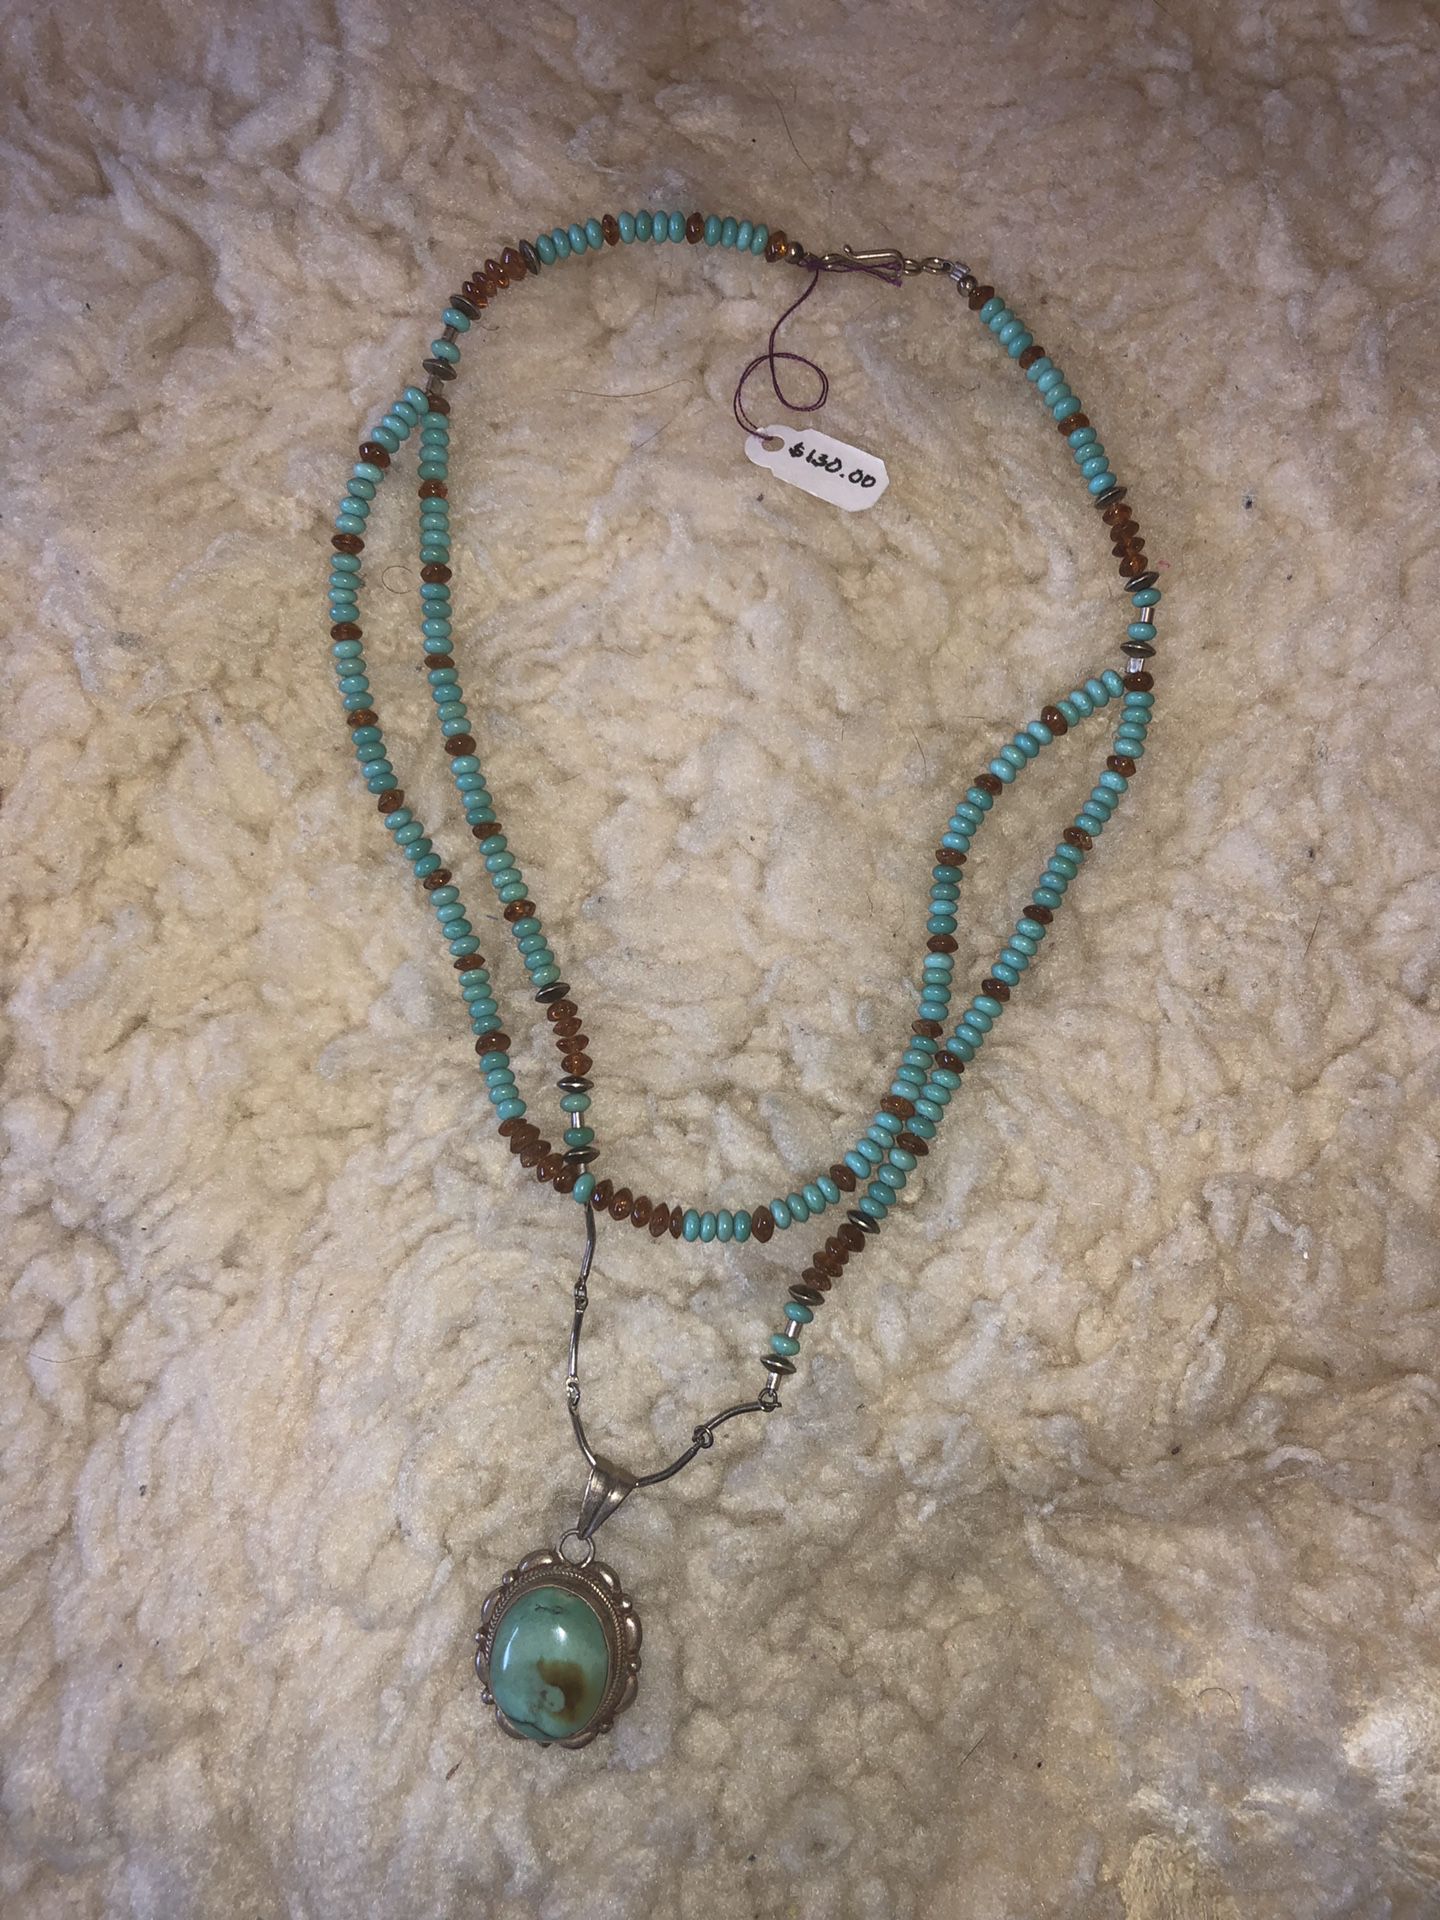 Light blue turquoise & Amber necklace with matching earrings $130